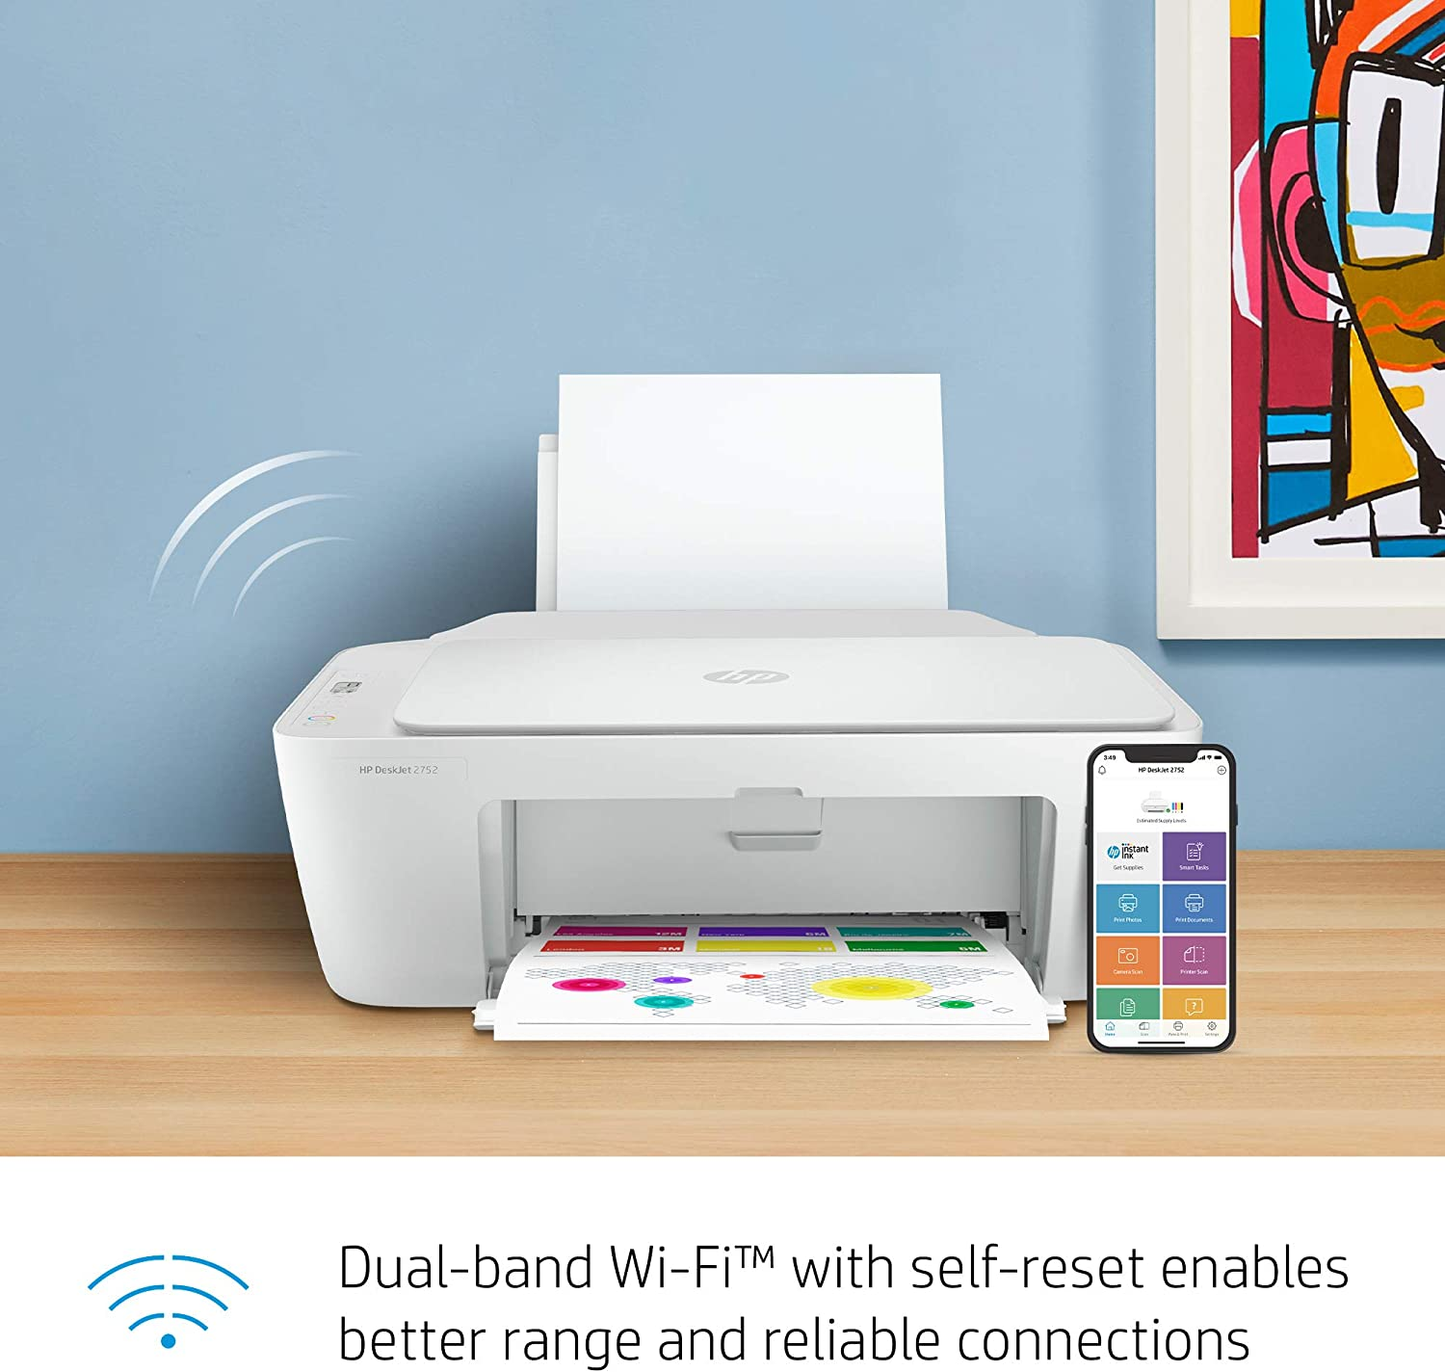 HP Deskjet 2752 Wireless All-In-One Color Inkjet Printer, Scan and Copy with Mobile Printing, 8RK11A (Renewed)